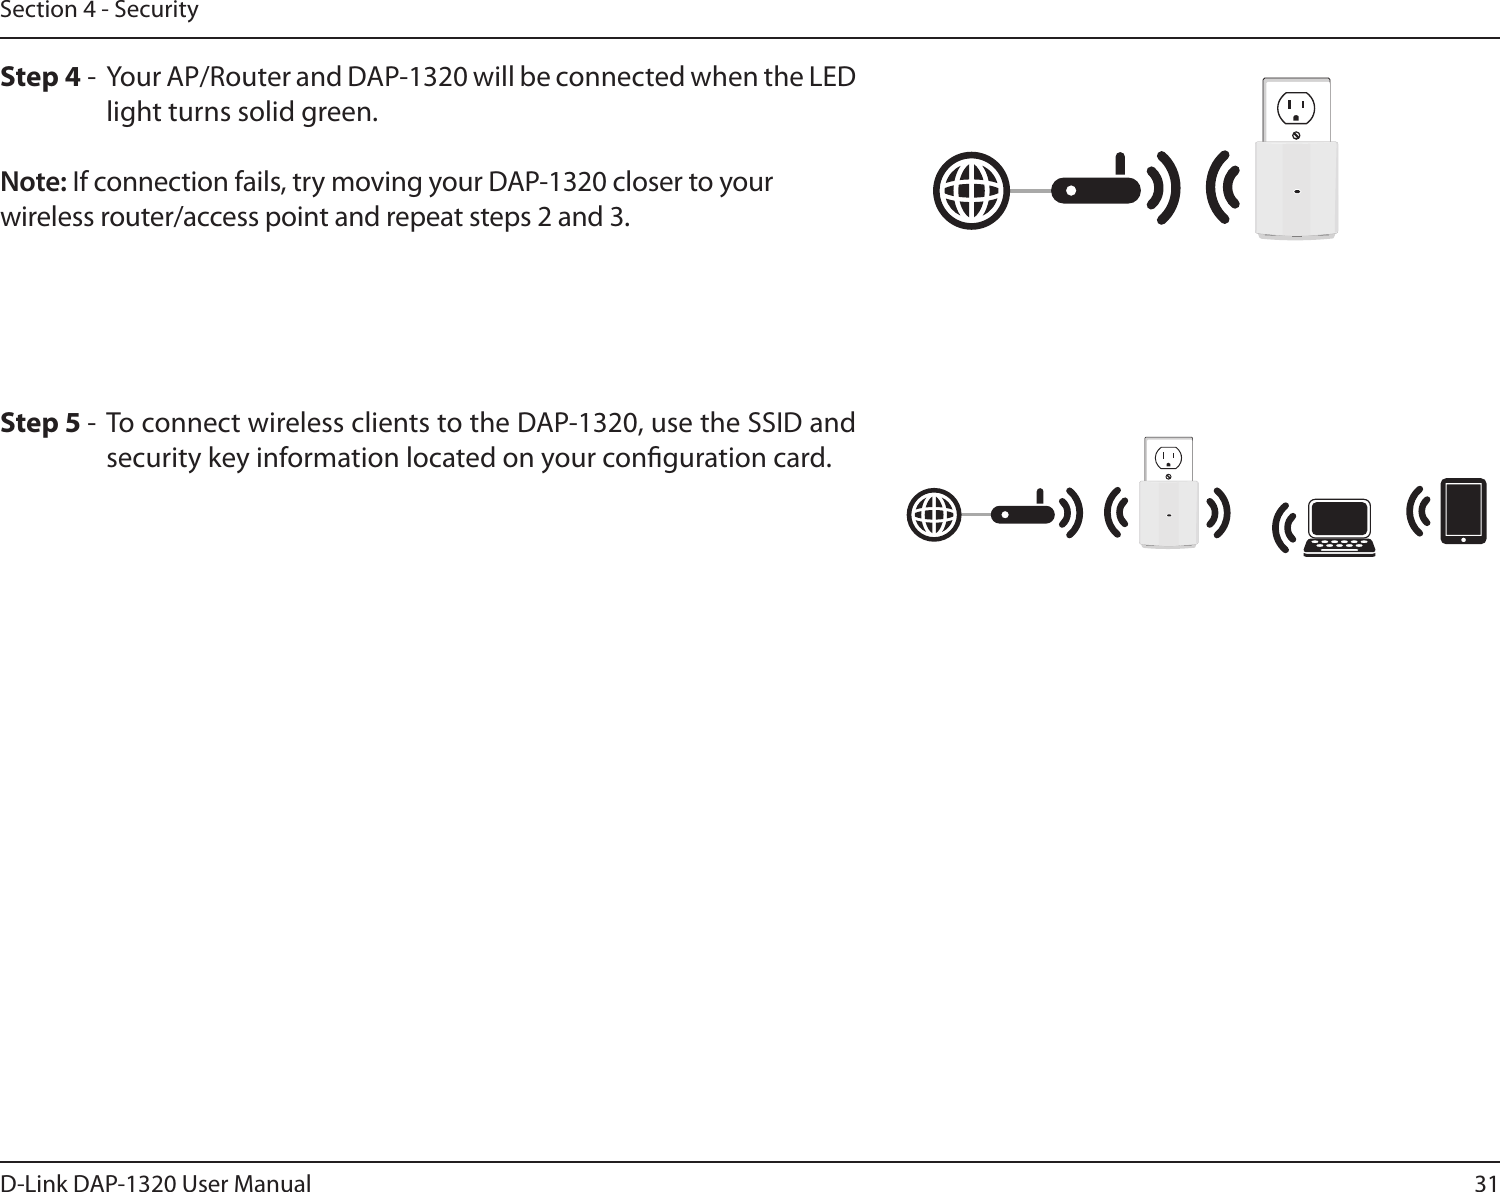 31D-Link DAP-1320 User ManualSection 4 - SecurityStep 5 -  To connect wireless clients to the DAP-1320, use the SSID and security key information located on your conguration card. Step 4 -  Your AP/Router and DAP-1320 will be connected when the LED light turns solid green. Note: If connection fails, try moving your DAP-1320 closer to your wireless router/access point and repeat steps 2 and 3. 